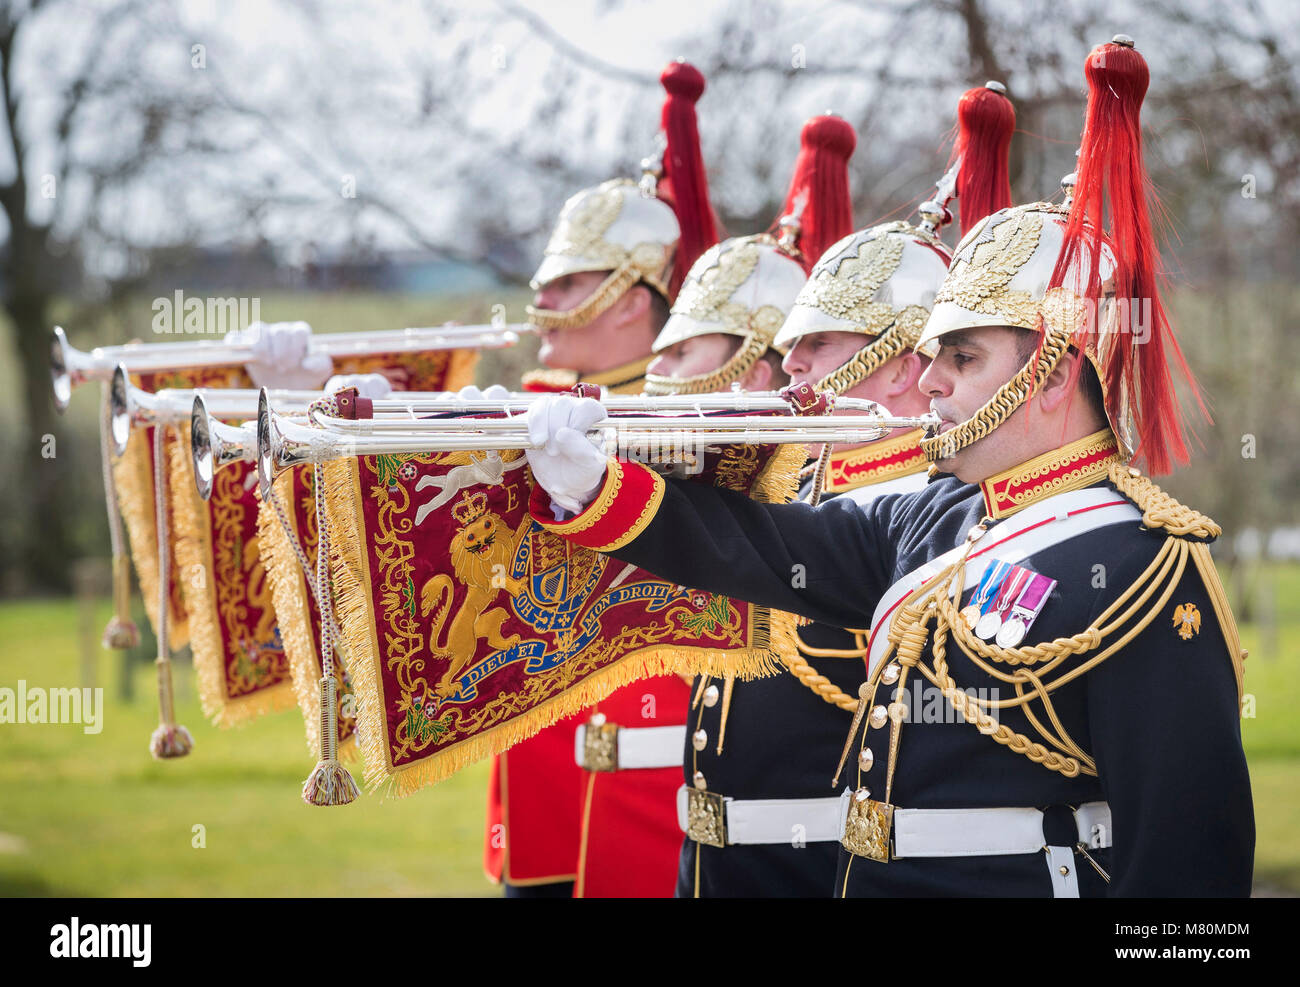 https://c8.alamy.com/comp/M80MDM/members-of-household-cavalry-test-fanfare-trumpets-which-could-play-M80MDM.jpg